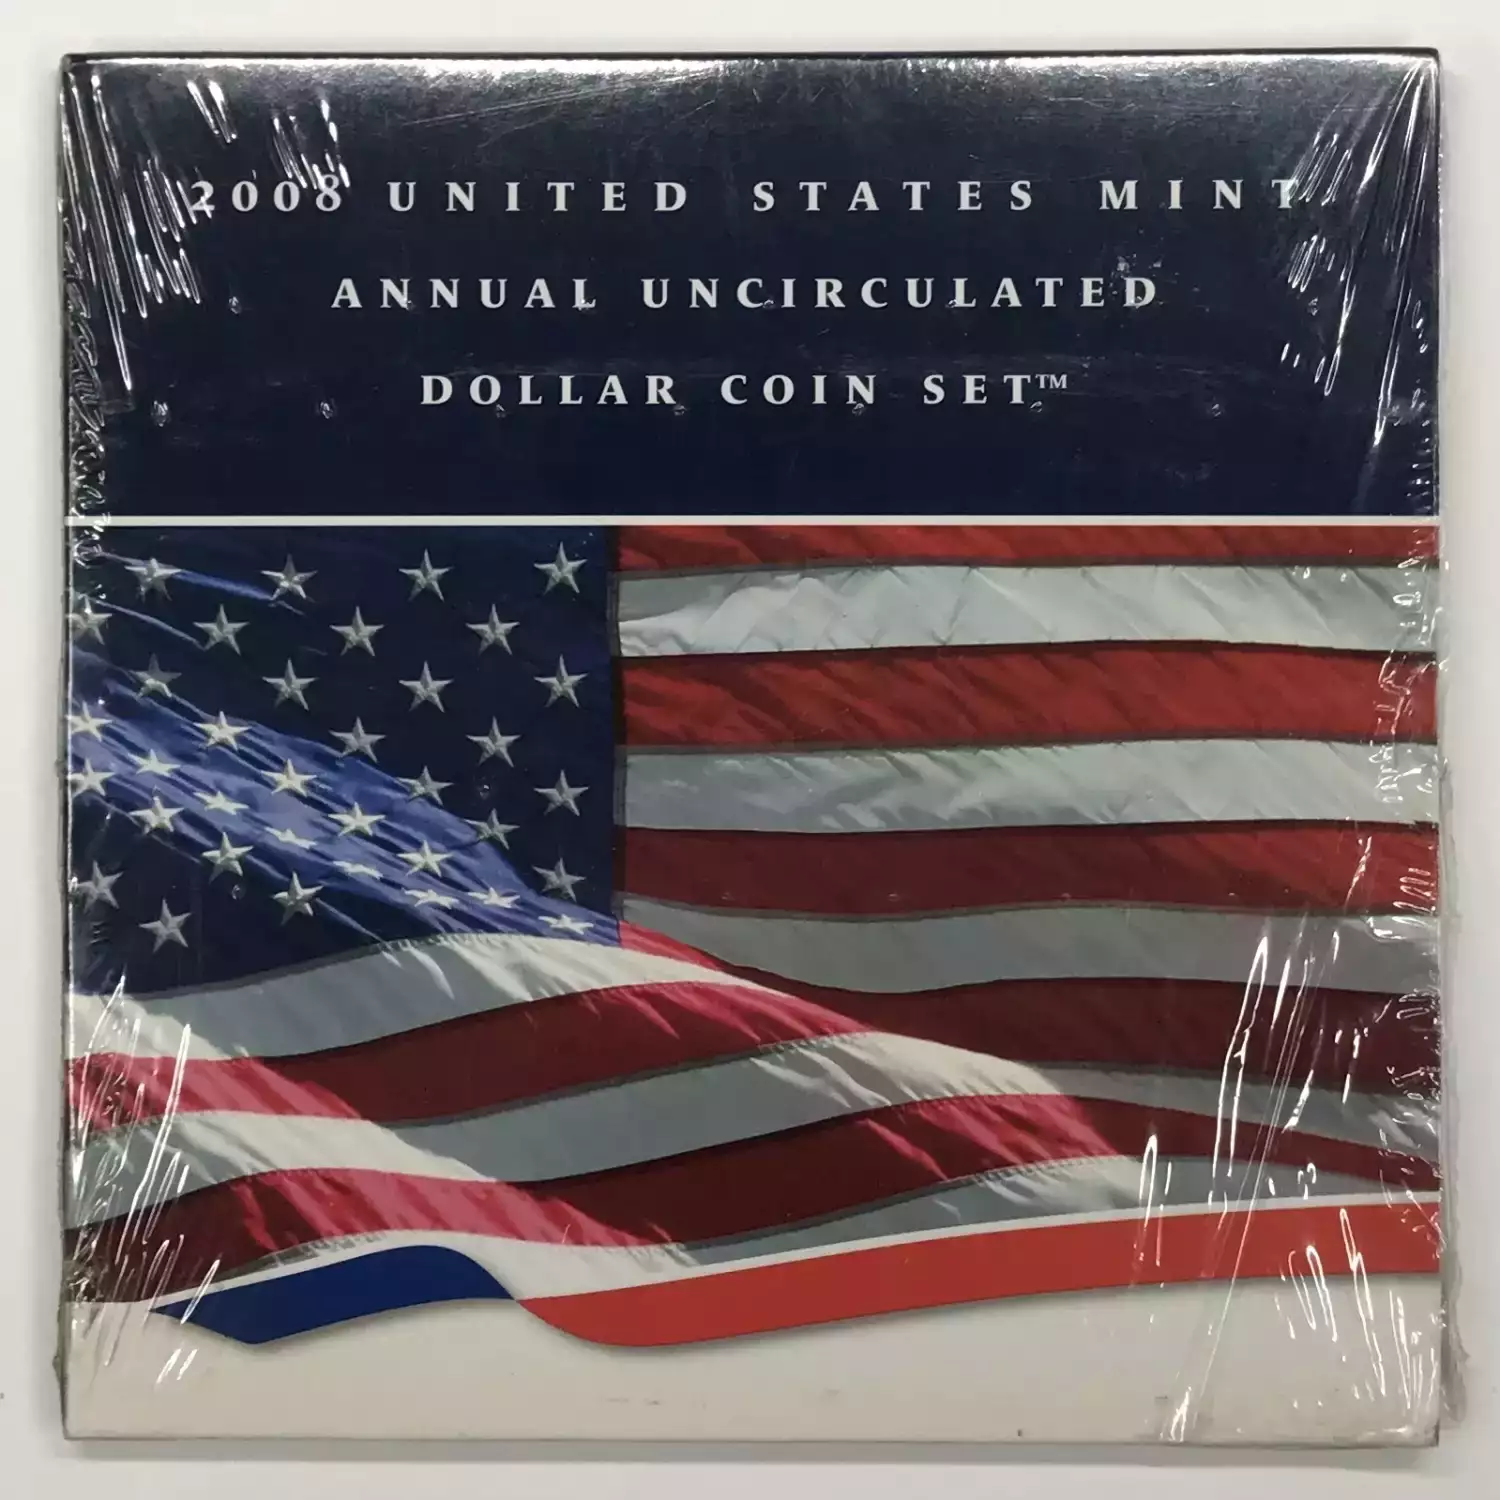 2008 Annual Uncirculated Dollar Coin Set incl. W Burnished ASE - US Mint Sealed